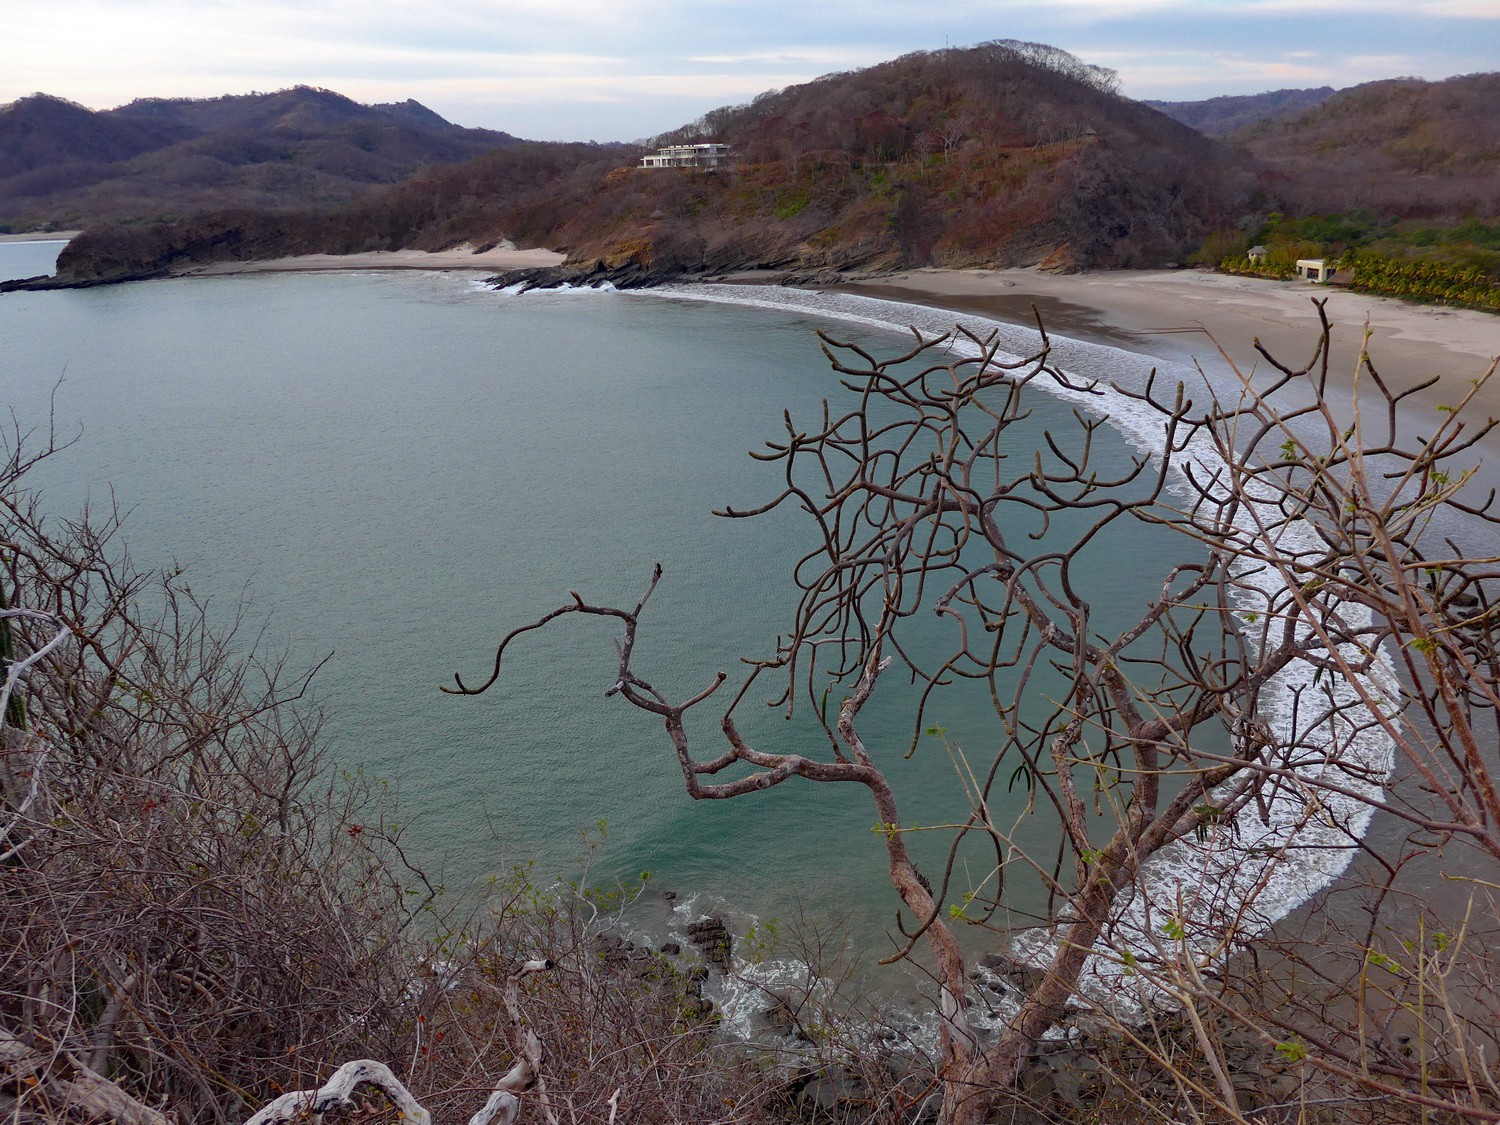 Playa Majagual seen from the viewpoint close to our campground